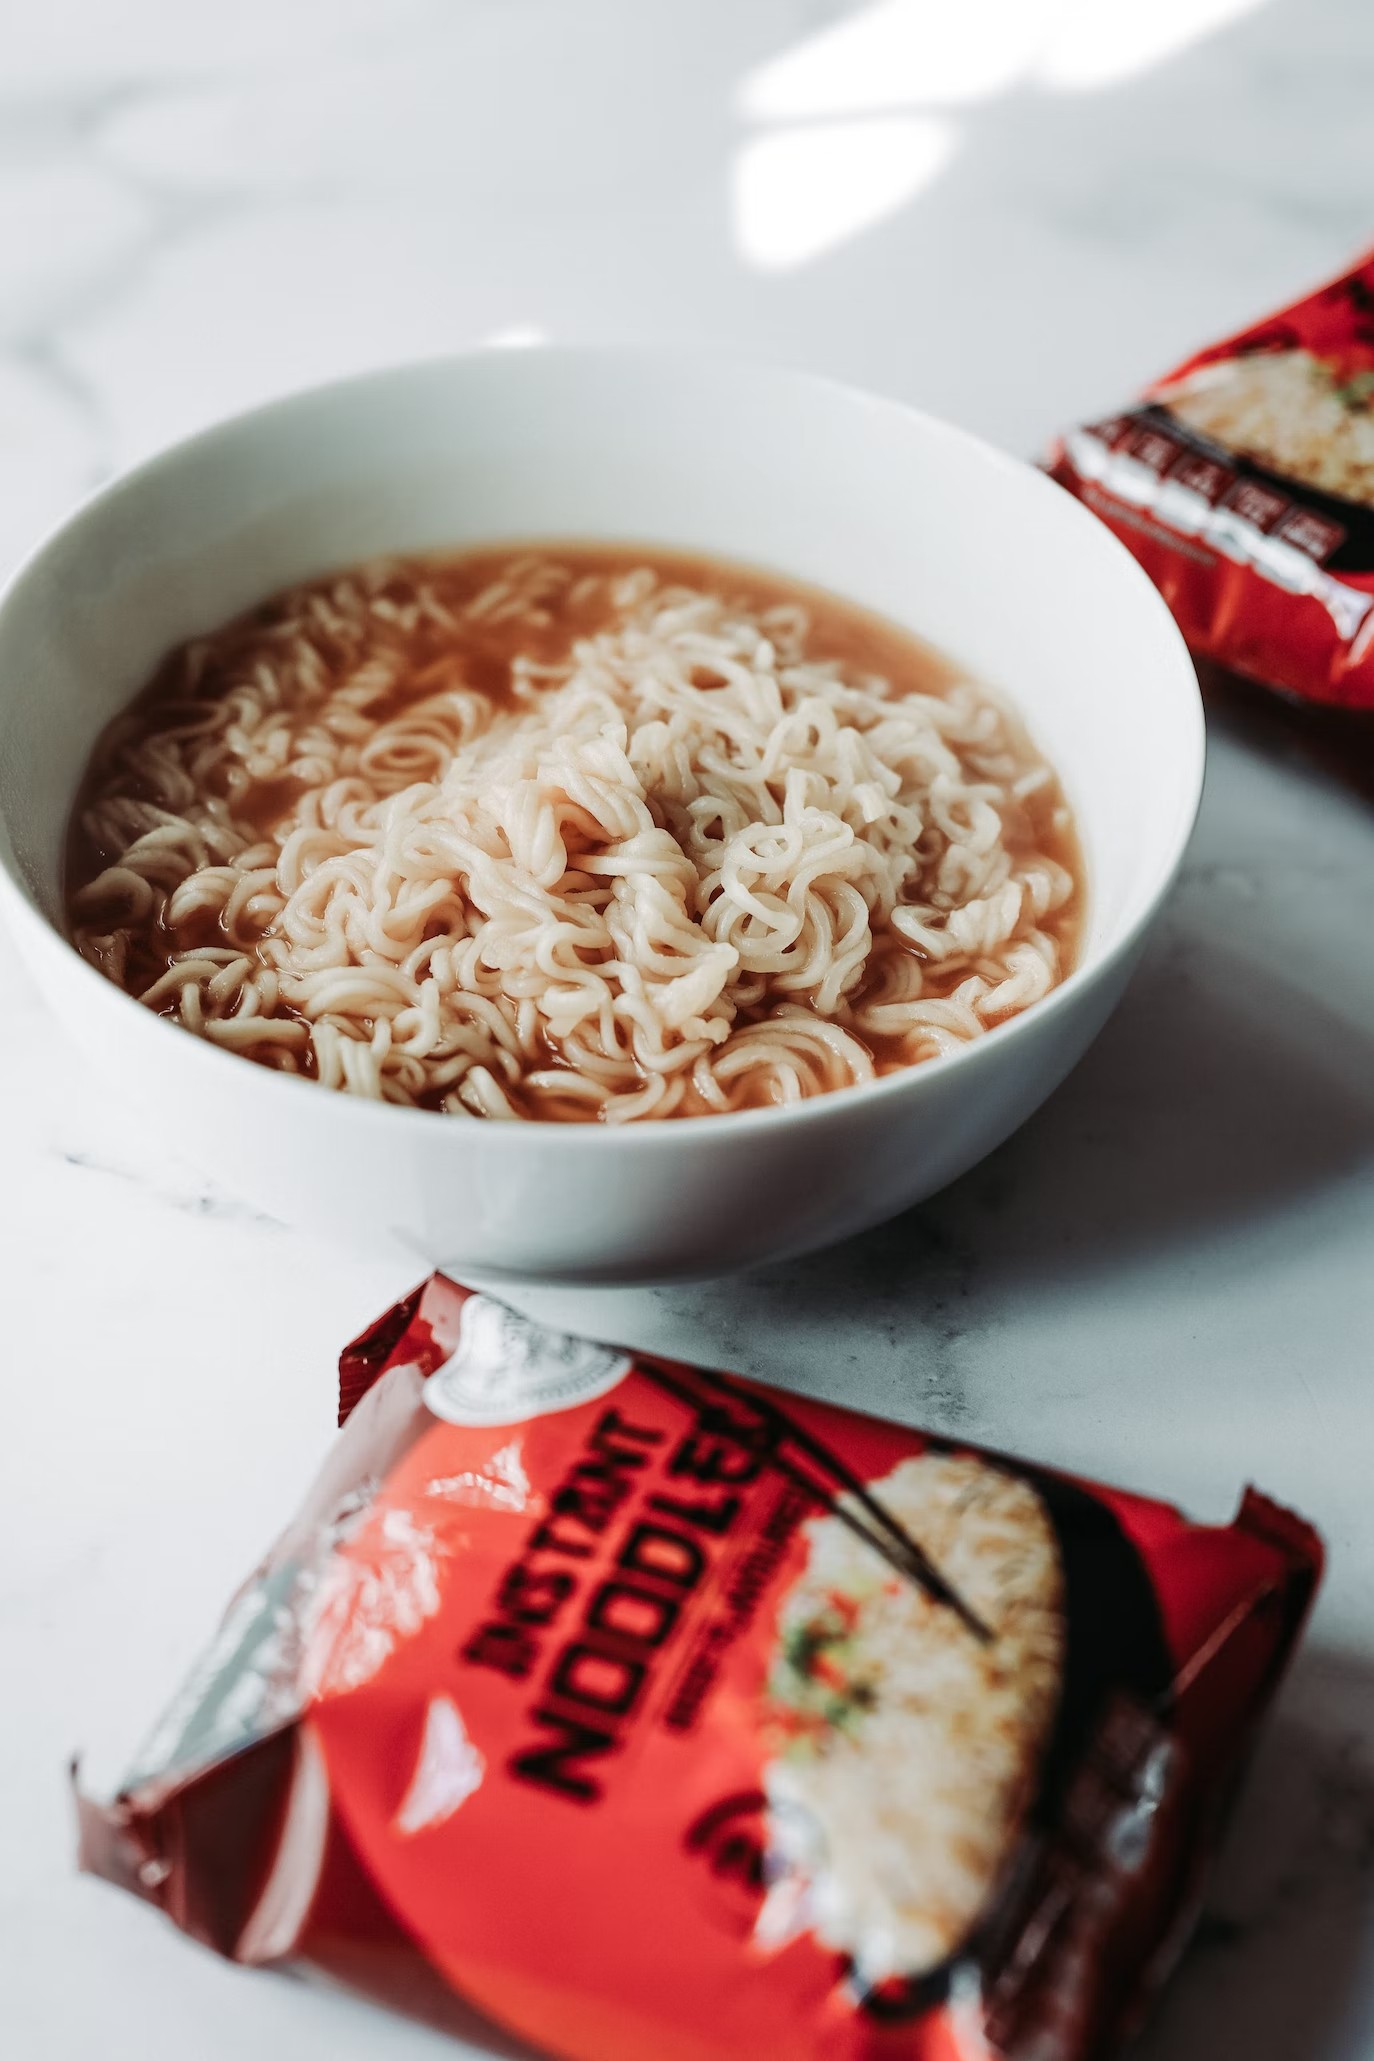 5 Ultra-Processed Food Items Like Instant Noodles And Energy Drinks To Keep Far From Your Diet